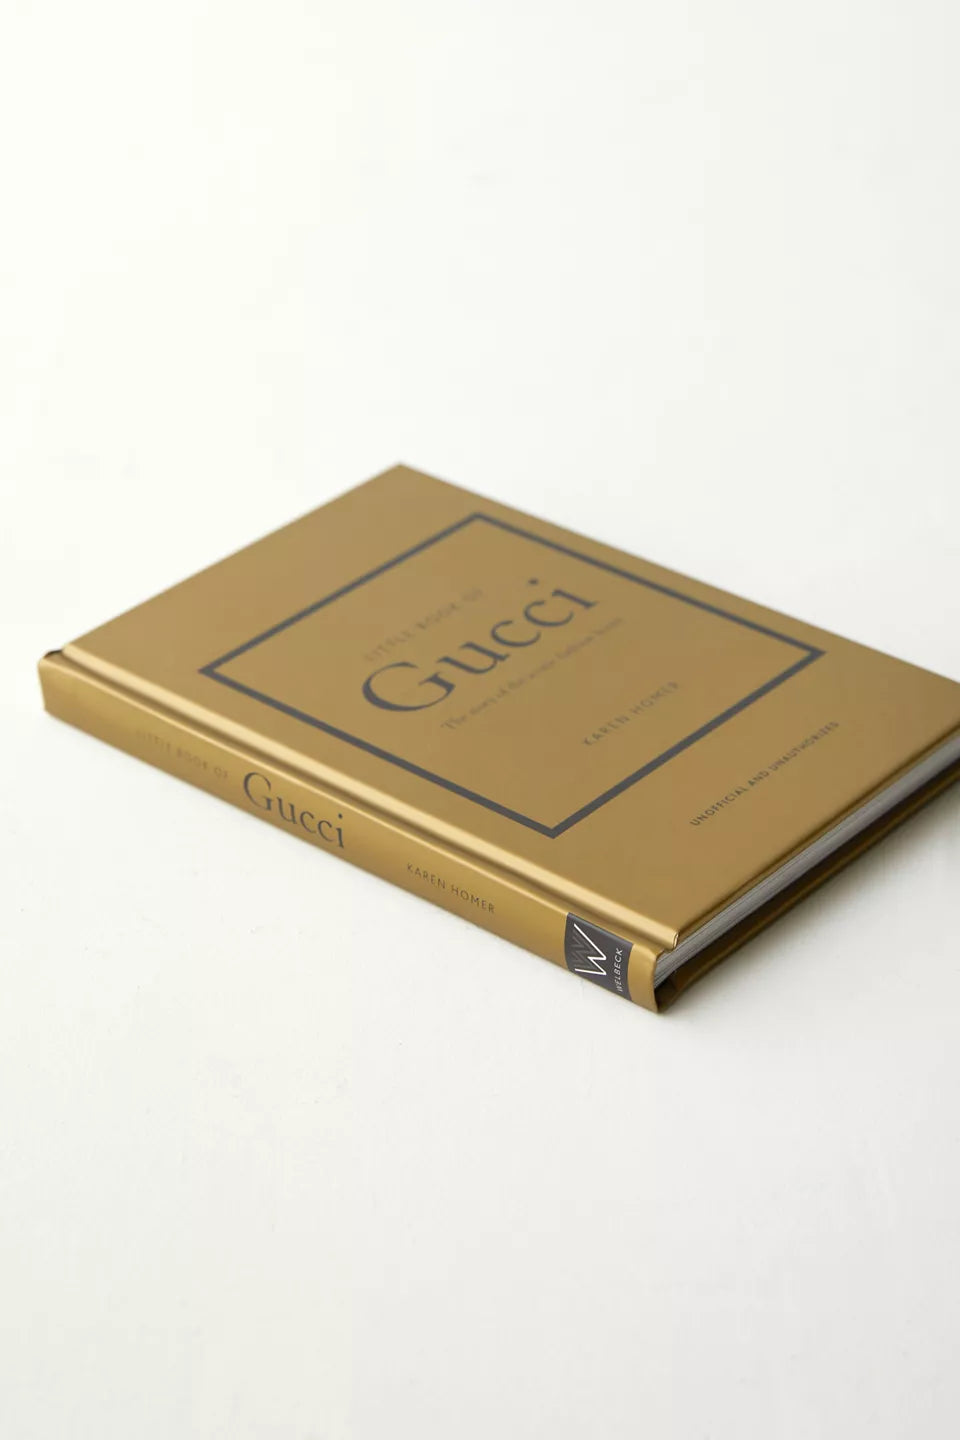 Little Book of Gucci: The Story of by Homer, Karen